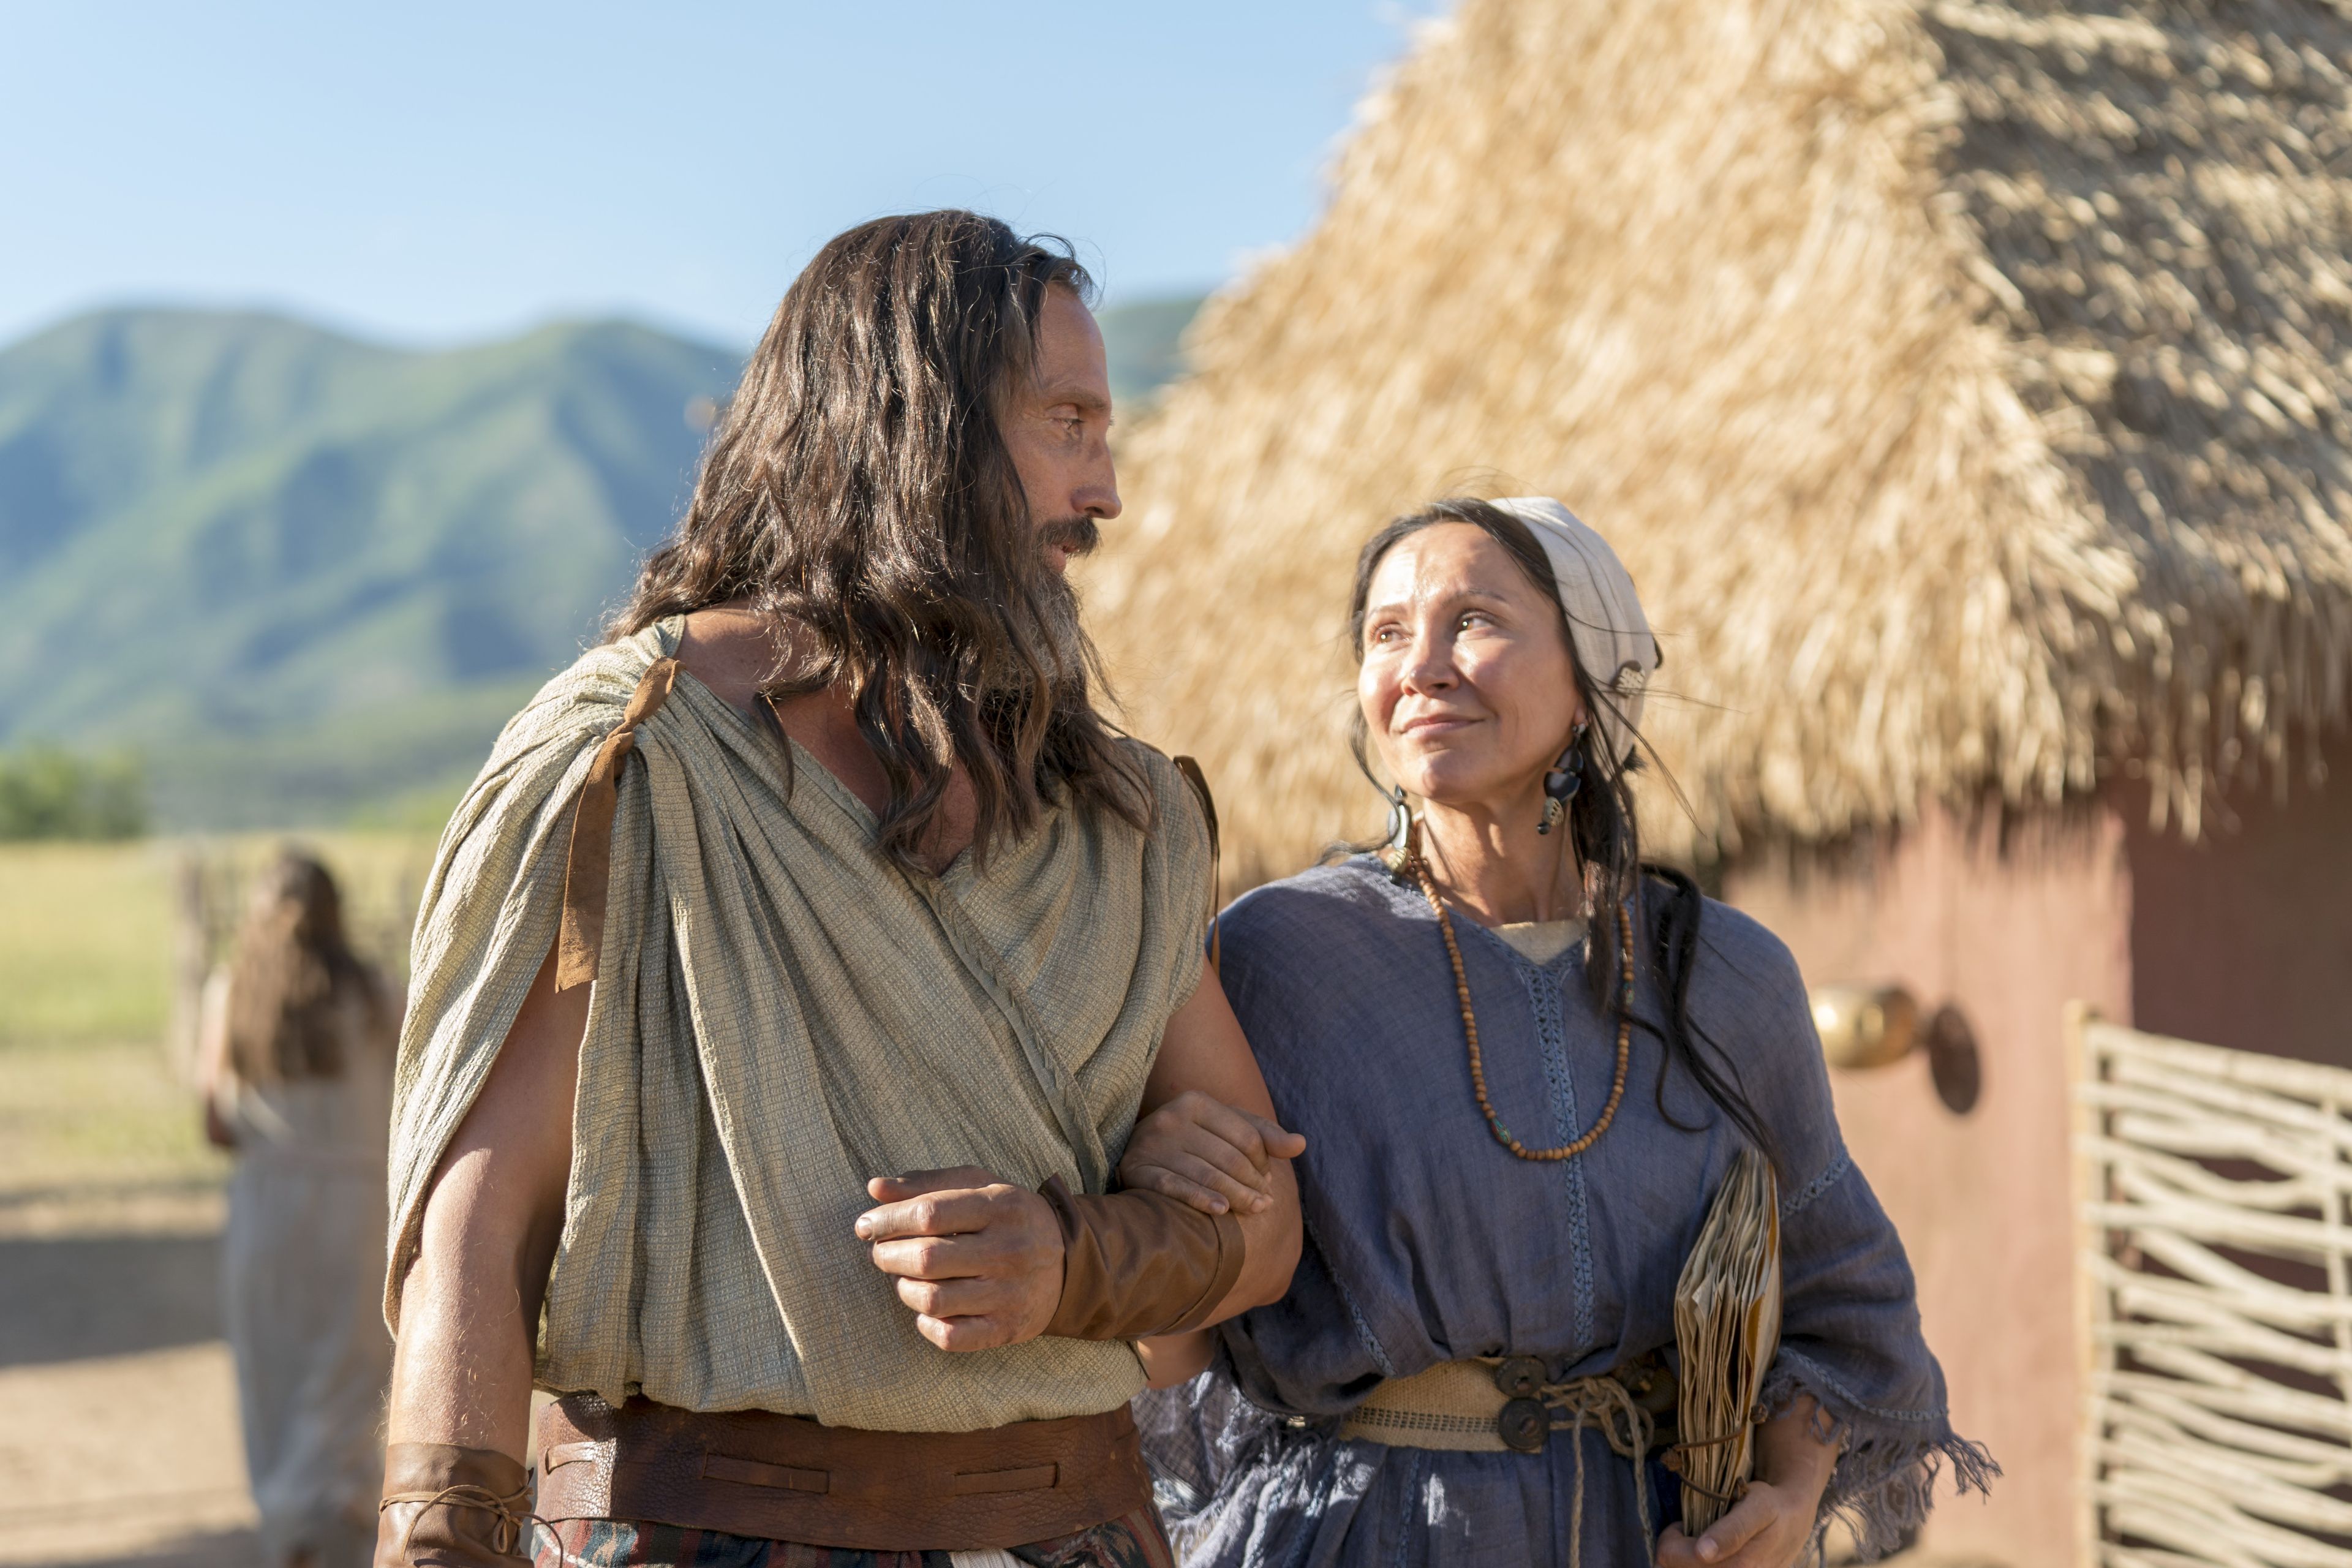 Nephi walks with his wife.